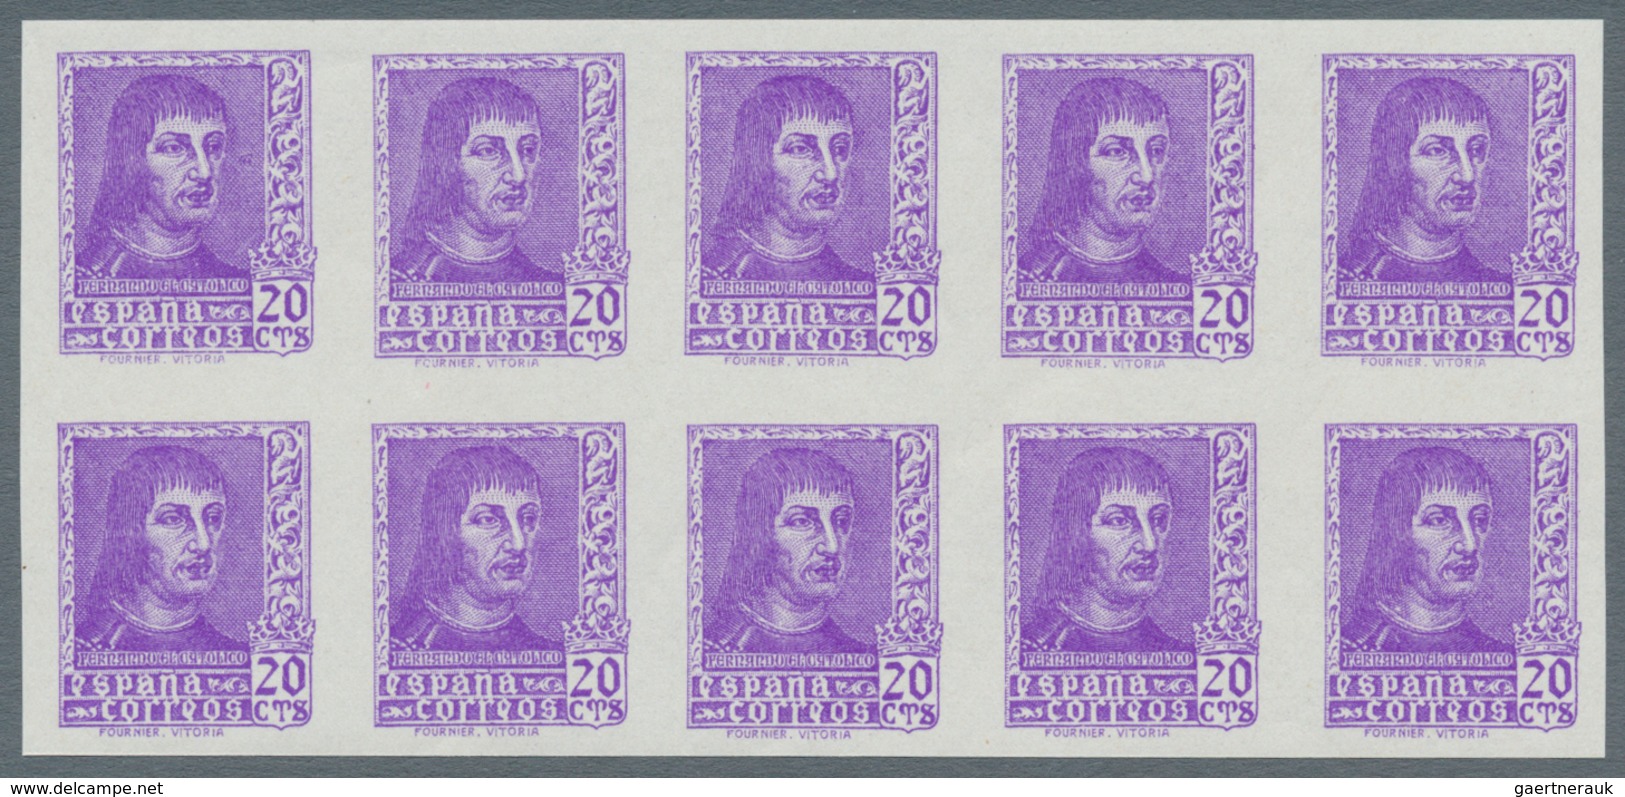 Spanien: 1938, Ferdinand II. complete set of six (incl. diff. imprints of 15c. and 30c.) in IMPERFOR